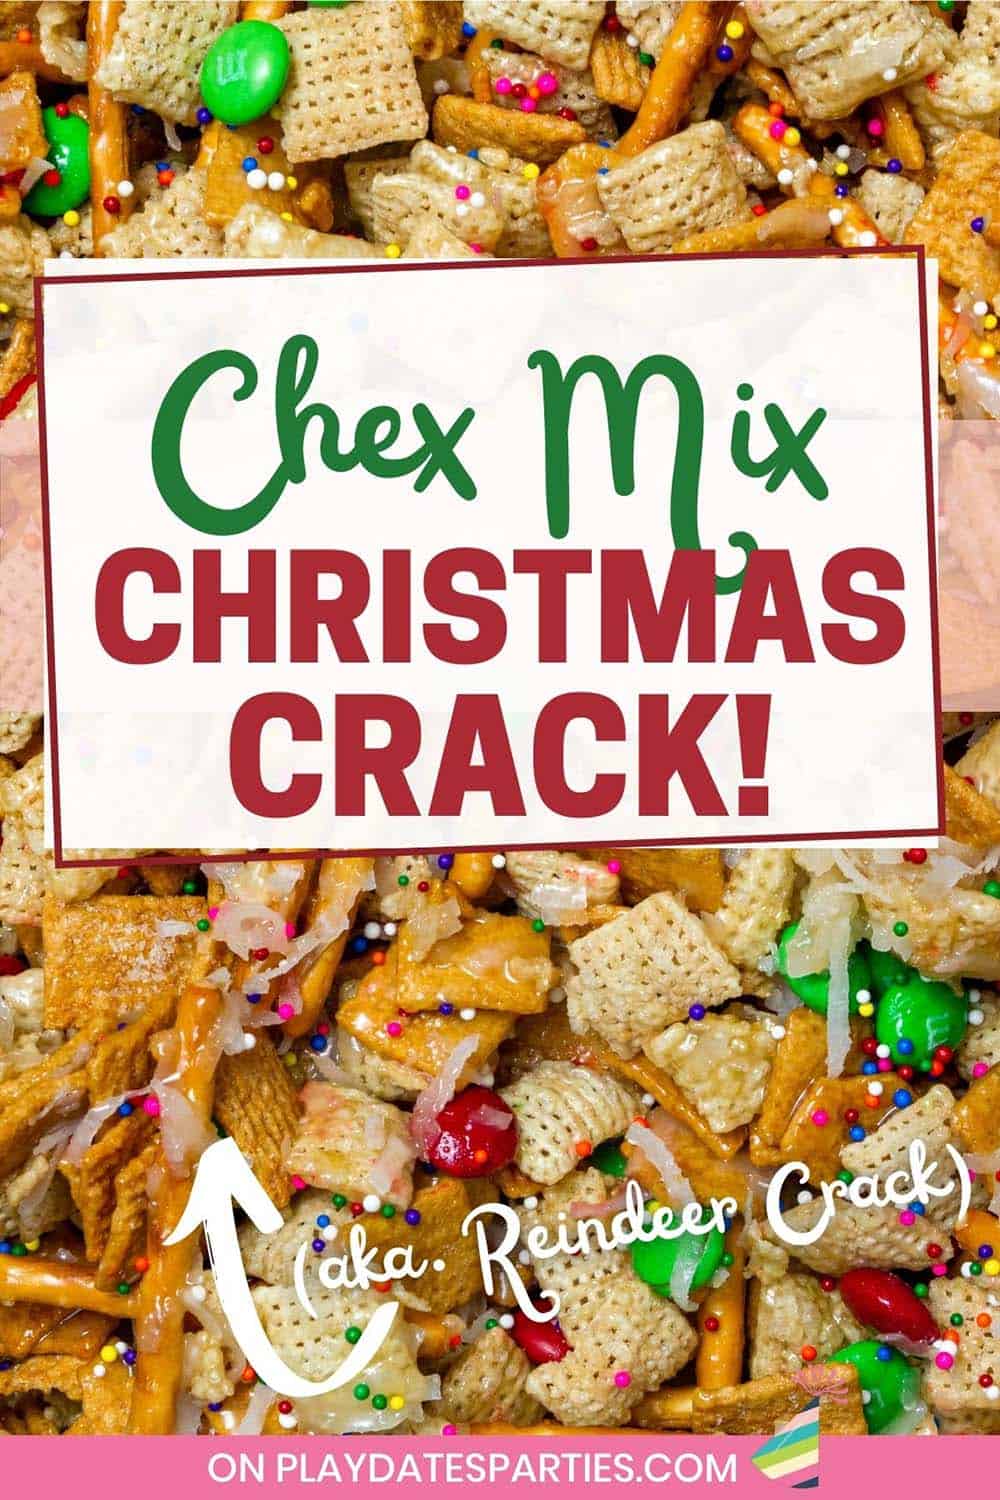 Chex mix with holiday candy and text overlay Chex mix Christmas Crack aka Reindeer Crack.